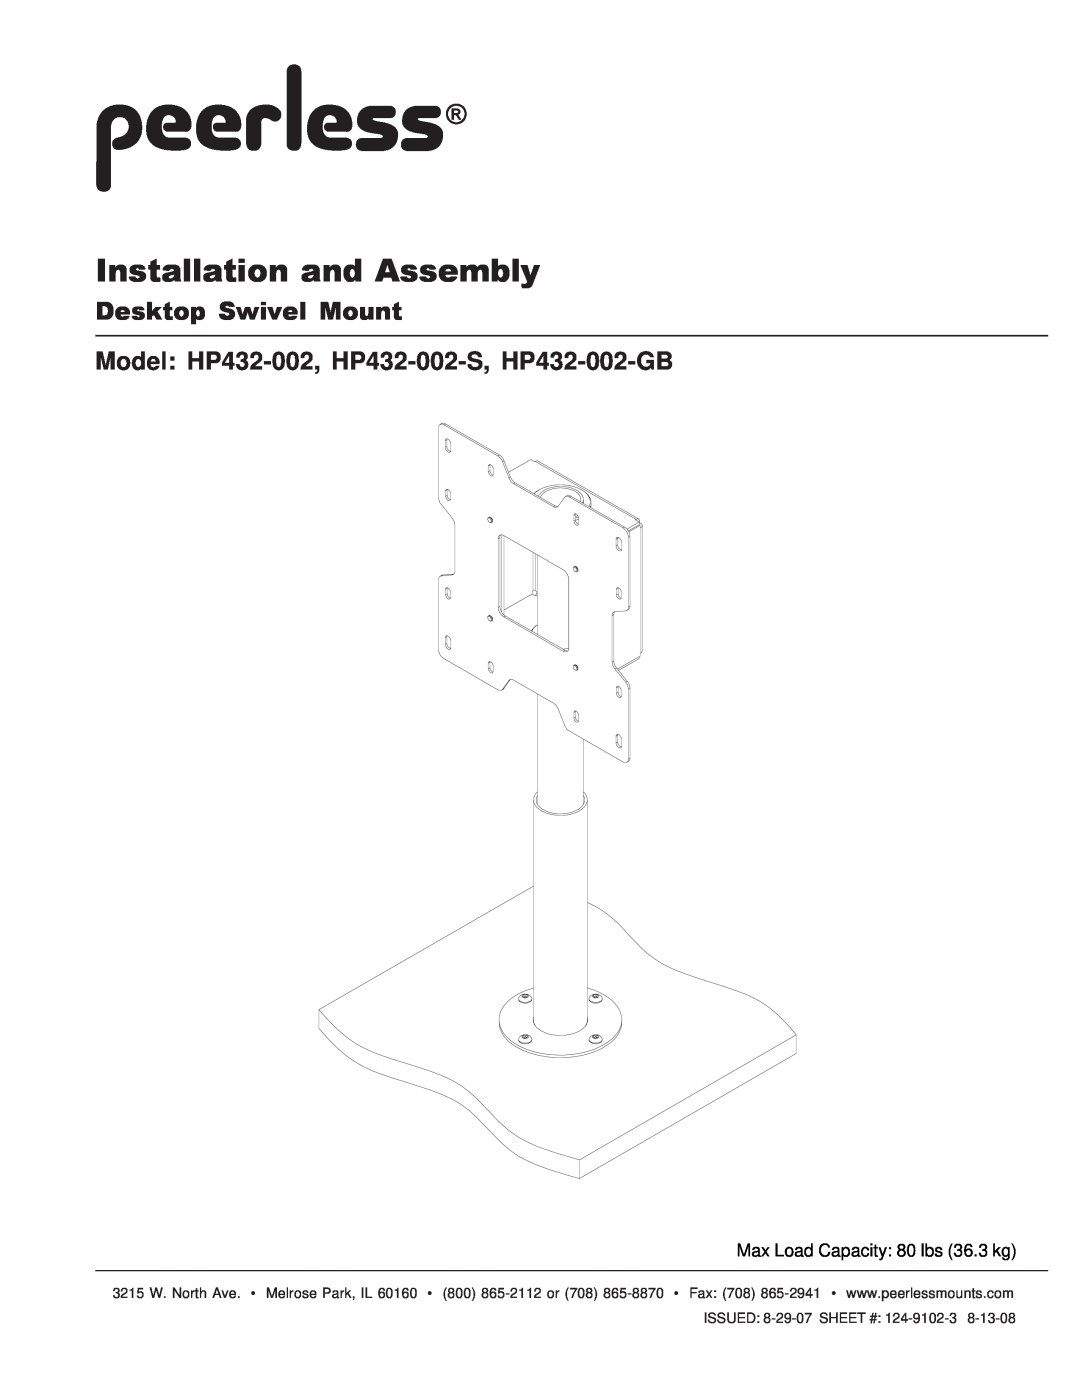 Peerless Industries manual Model HP432-002, HP432-002-S, HP432-002-GB, Installation and Assembly, Desktop Swivel Mount 